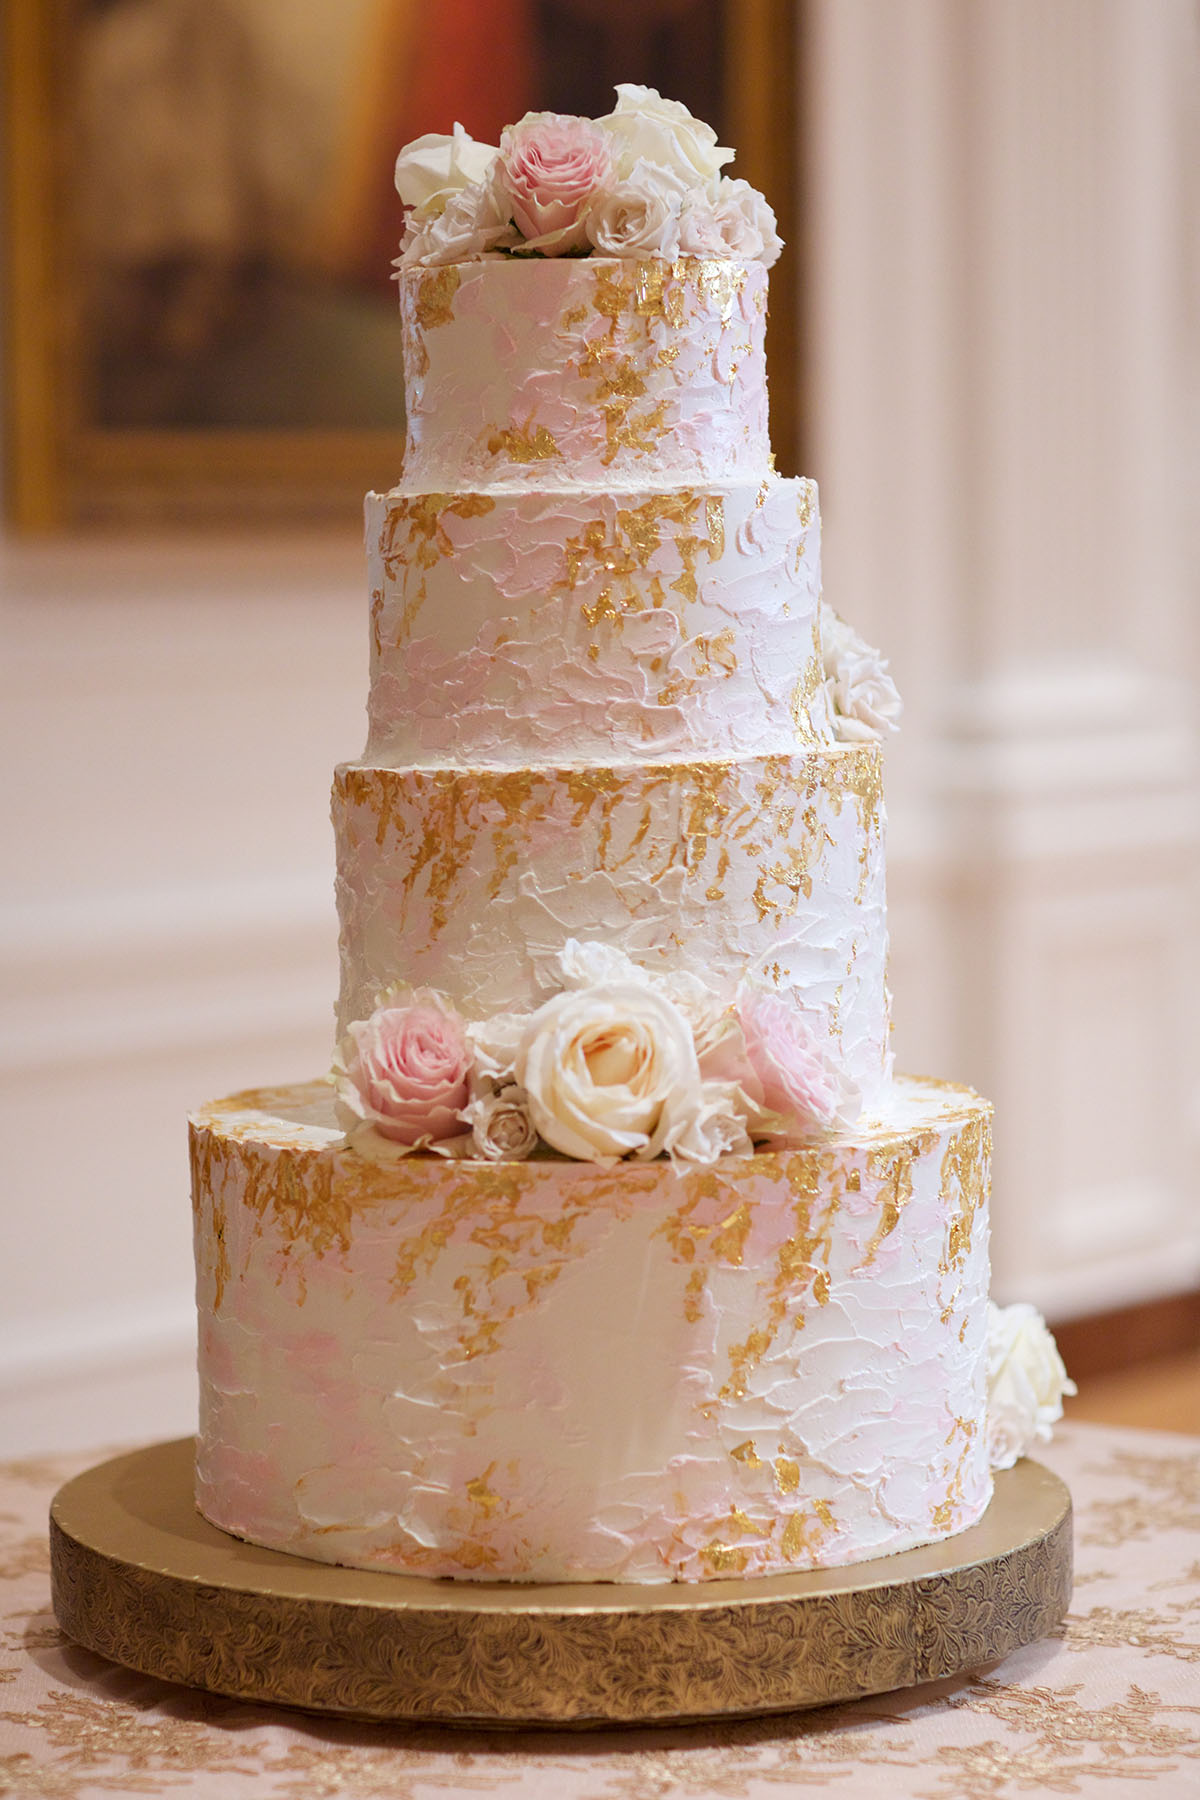 You'll want to a be a guest at this couple's Beauty and the Beast inspired wedding pink and gold leaf cake